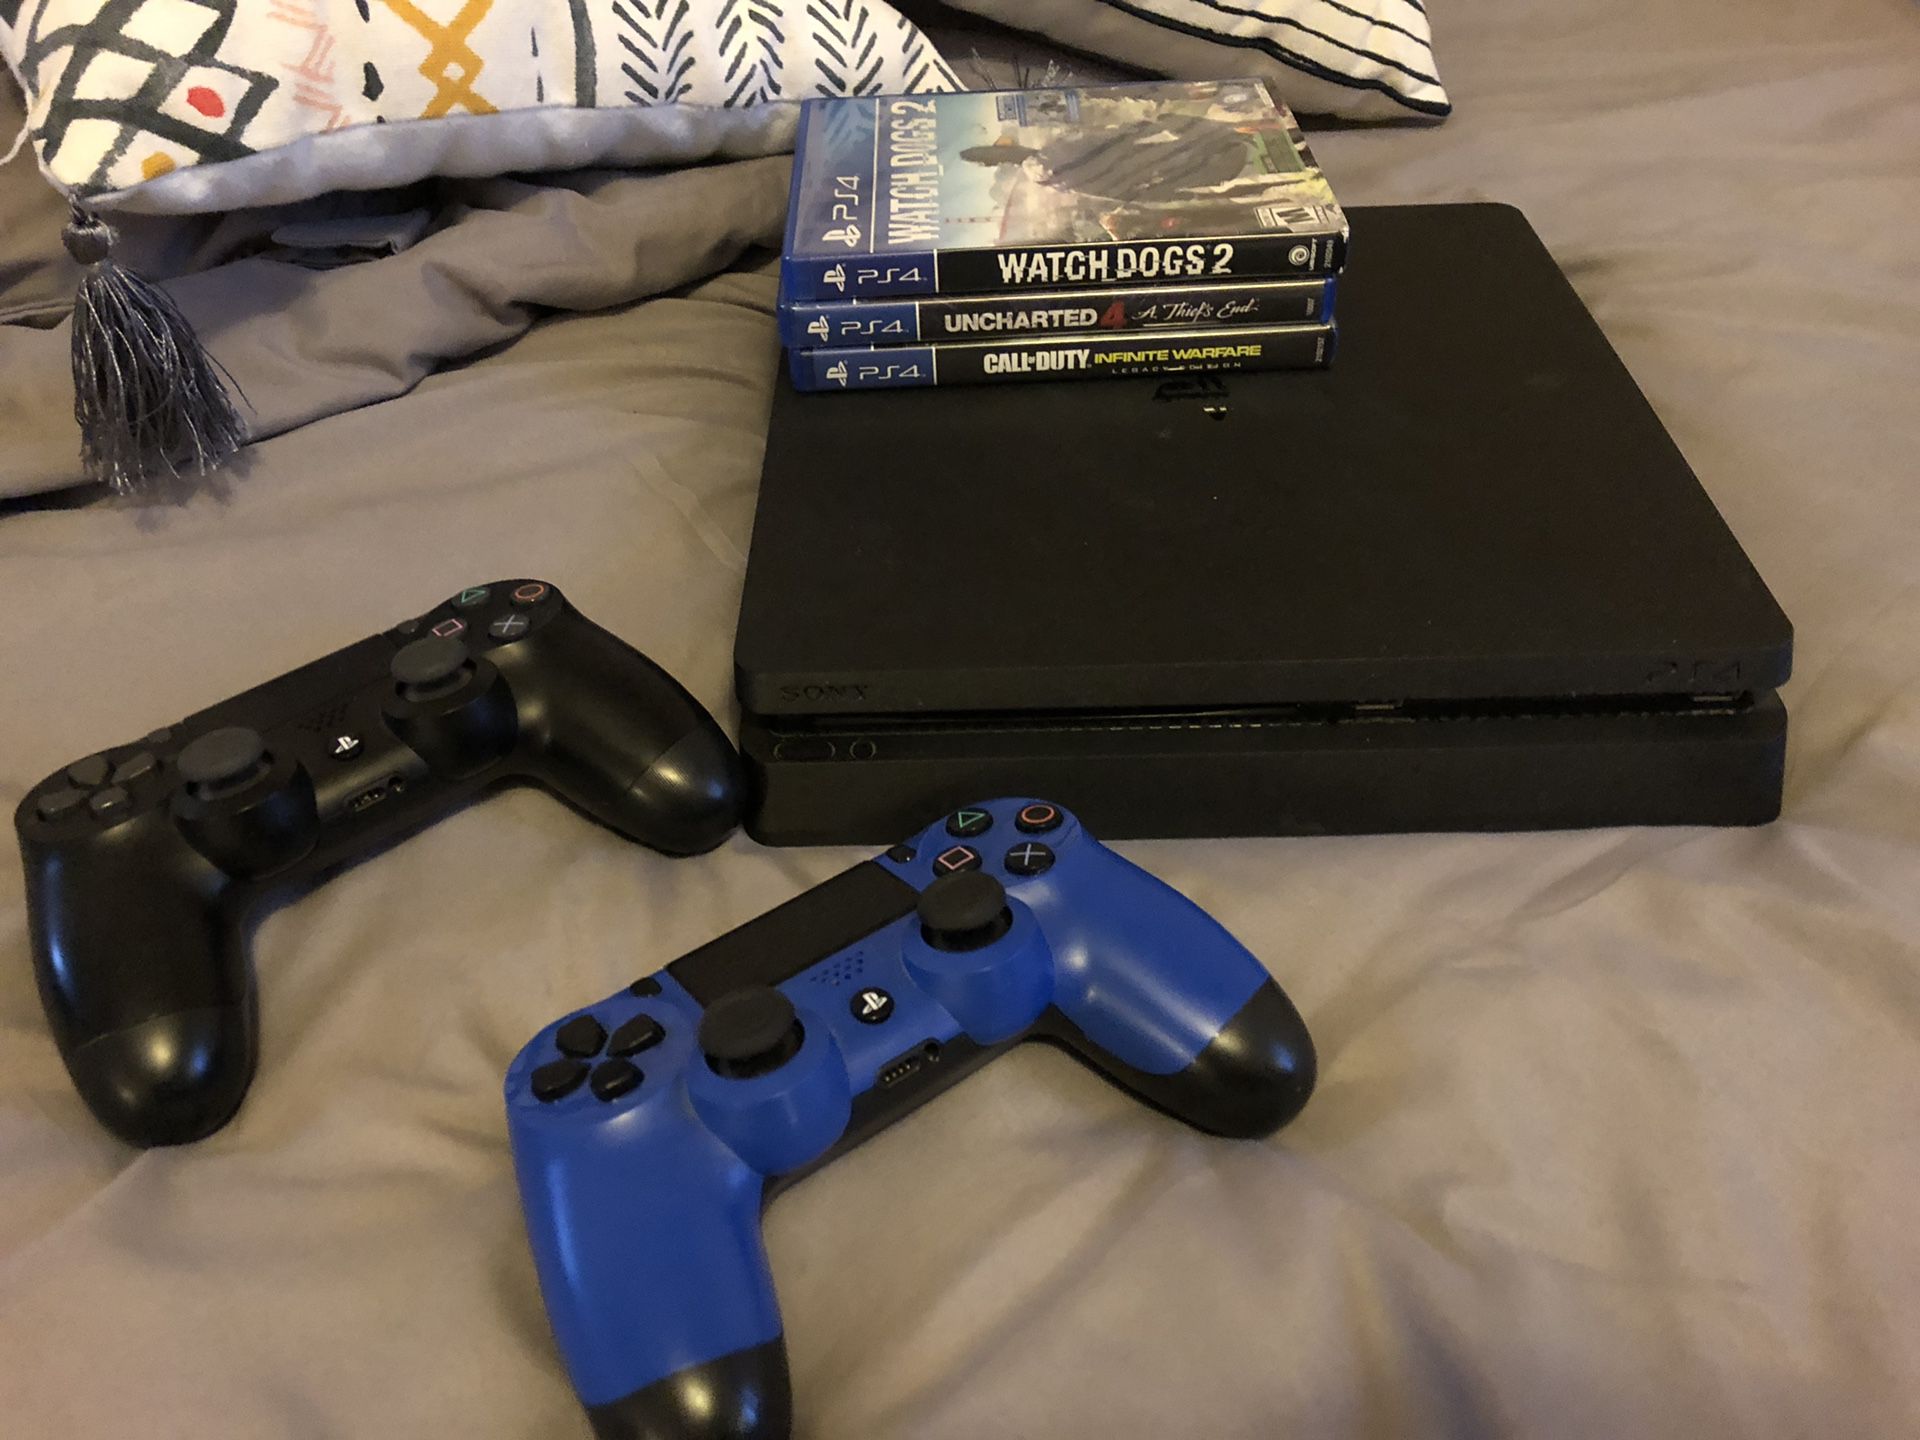 PS4 with controls and games